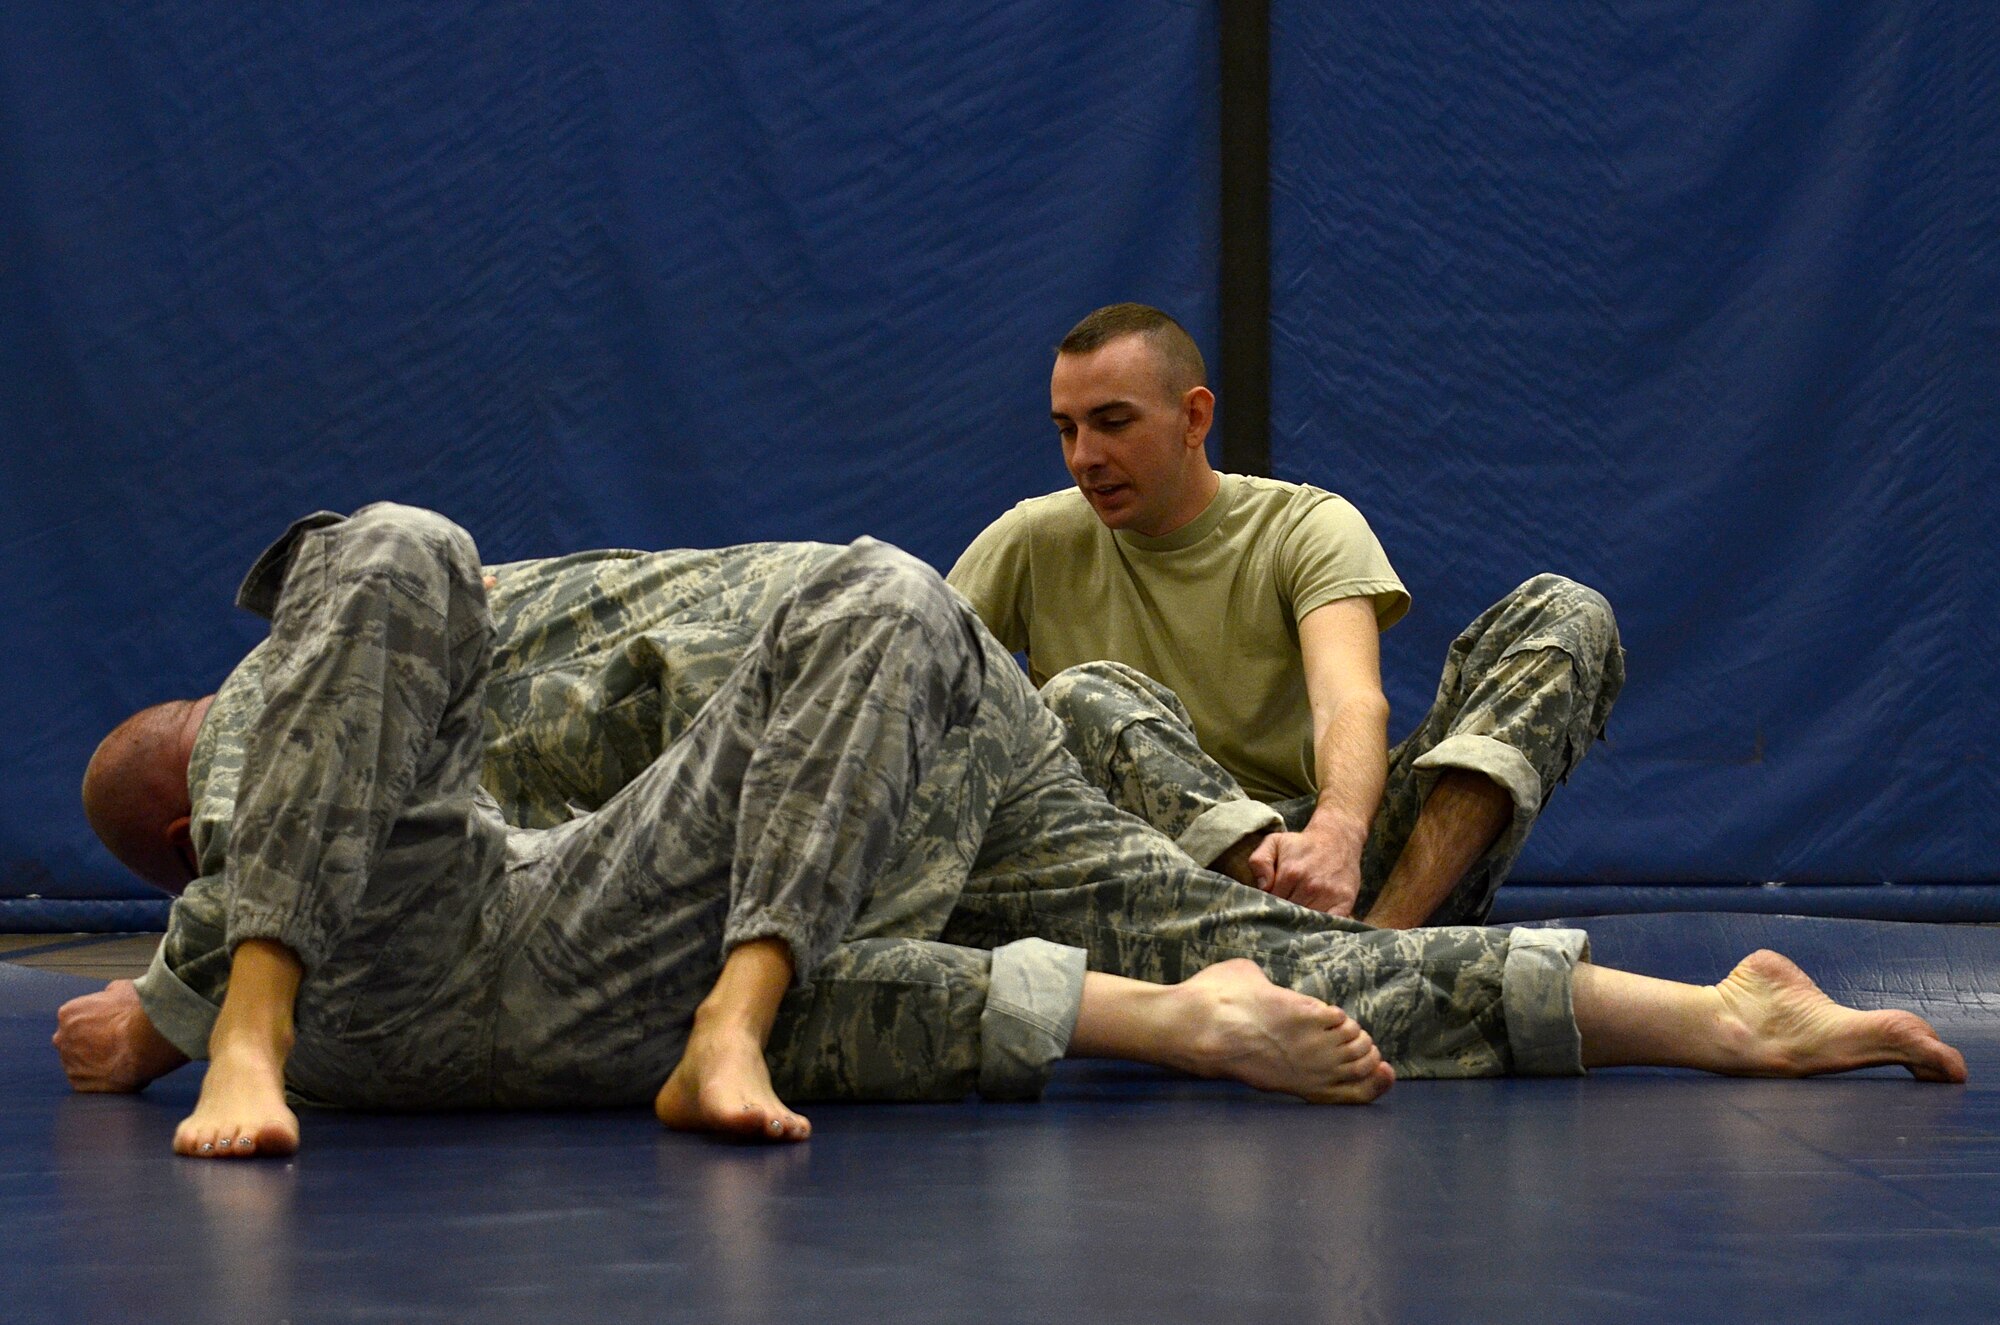 Spc. Charles Welling, assigned to the 1st Battlefield Coordination Detachment, monitors two students  practice ground grappling during the Modern Army Combatives Program (MACP) Basic Combatives Course Level 1 at the Benko Fitness Center on Davis-Monthan AFB, Ariz., Jan. 13, 2014. MACP is a 40-hour course that focuses on three phases of basic fight strategy; close the distance, gain the dominate position, and how to finish the fight. (U.S. Air Force photo by Staff Sgt. Heather R. Redman/Released) 
